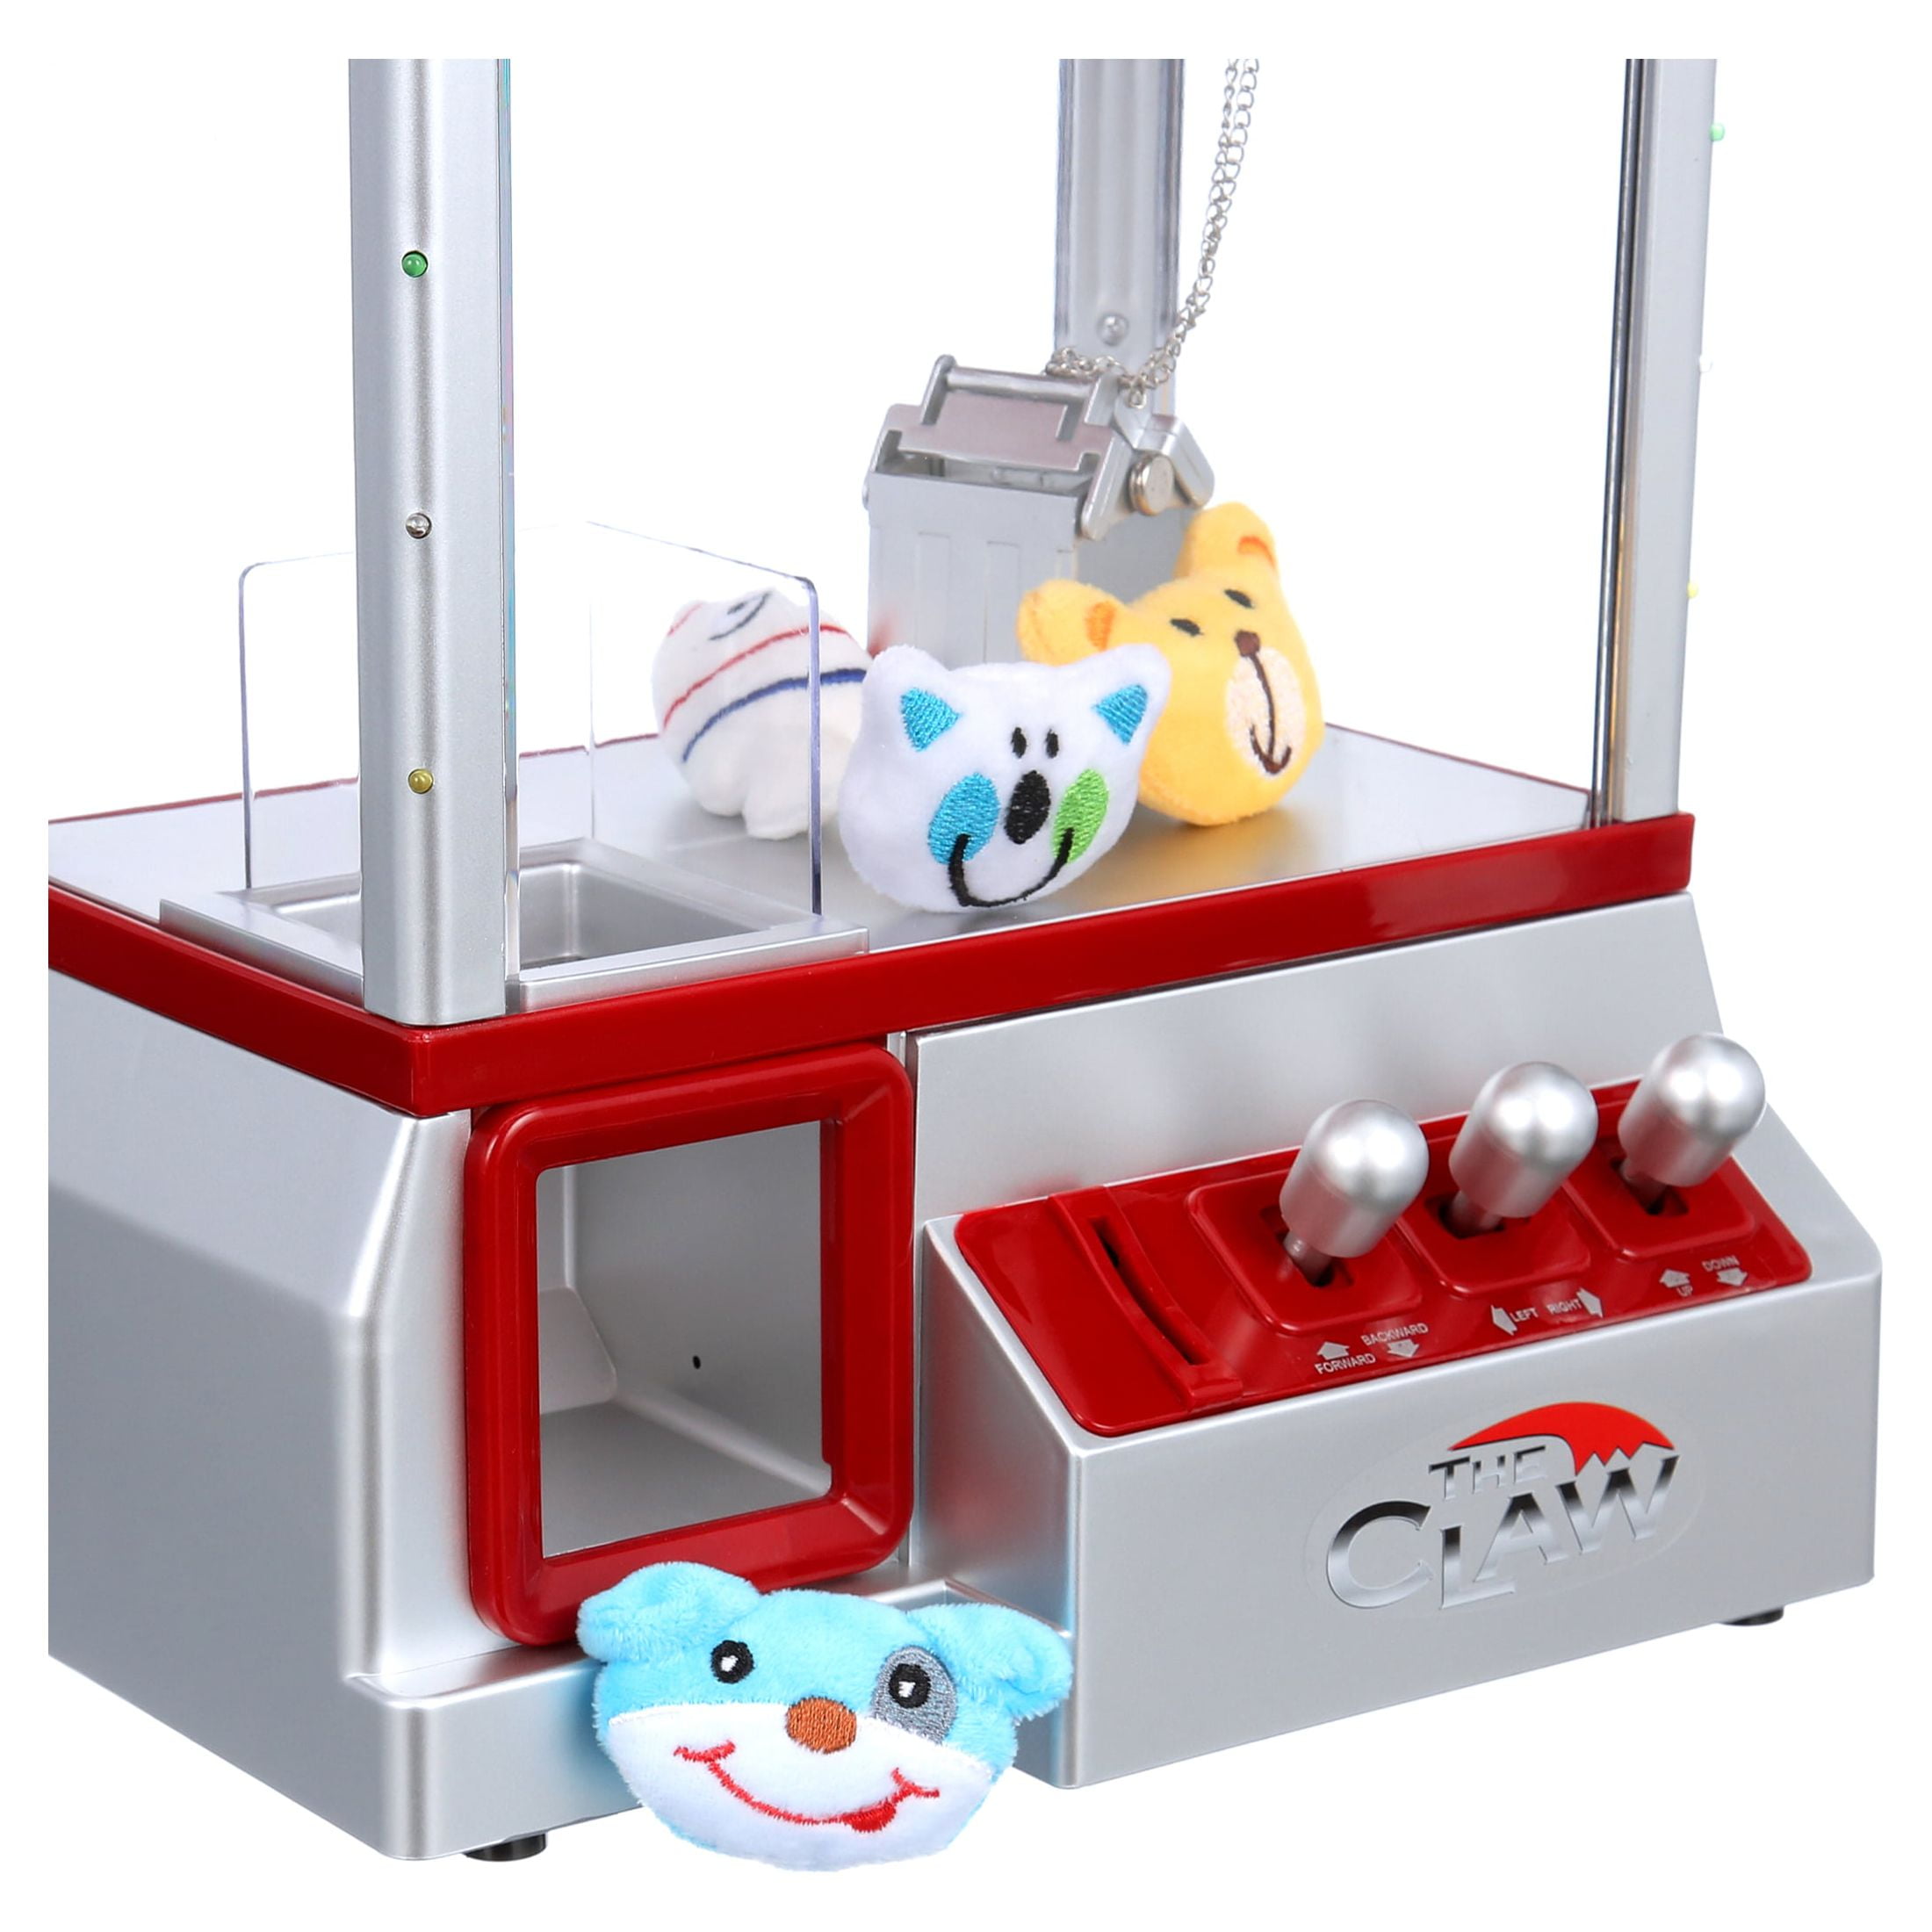 Slw-852A Musical Large Claw Game Machine Electronic Candy Grabber